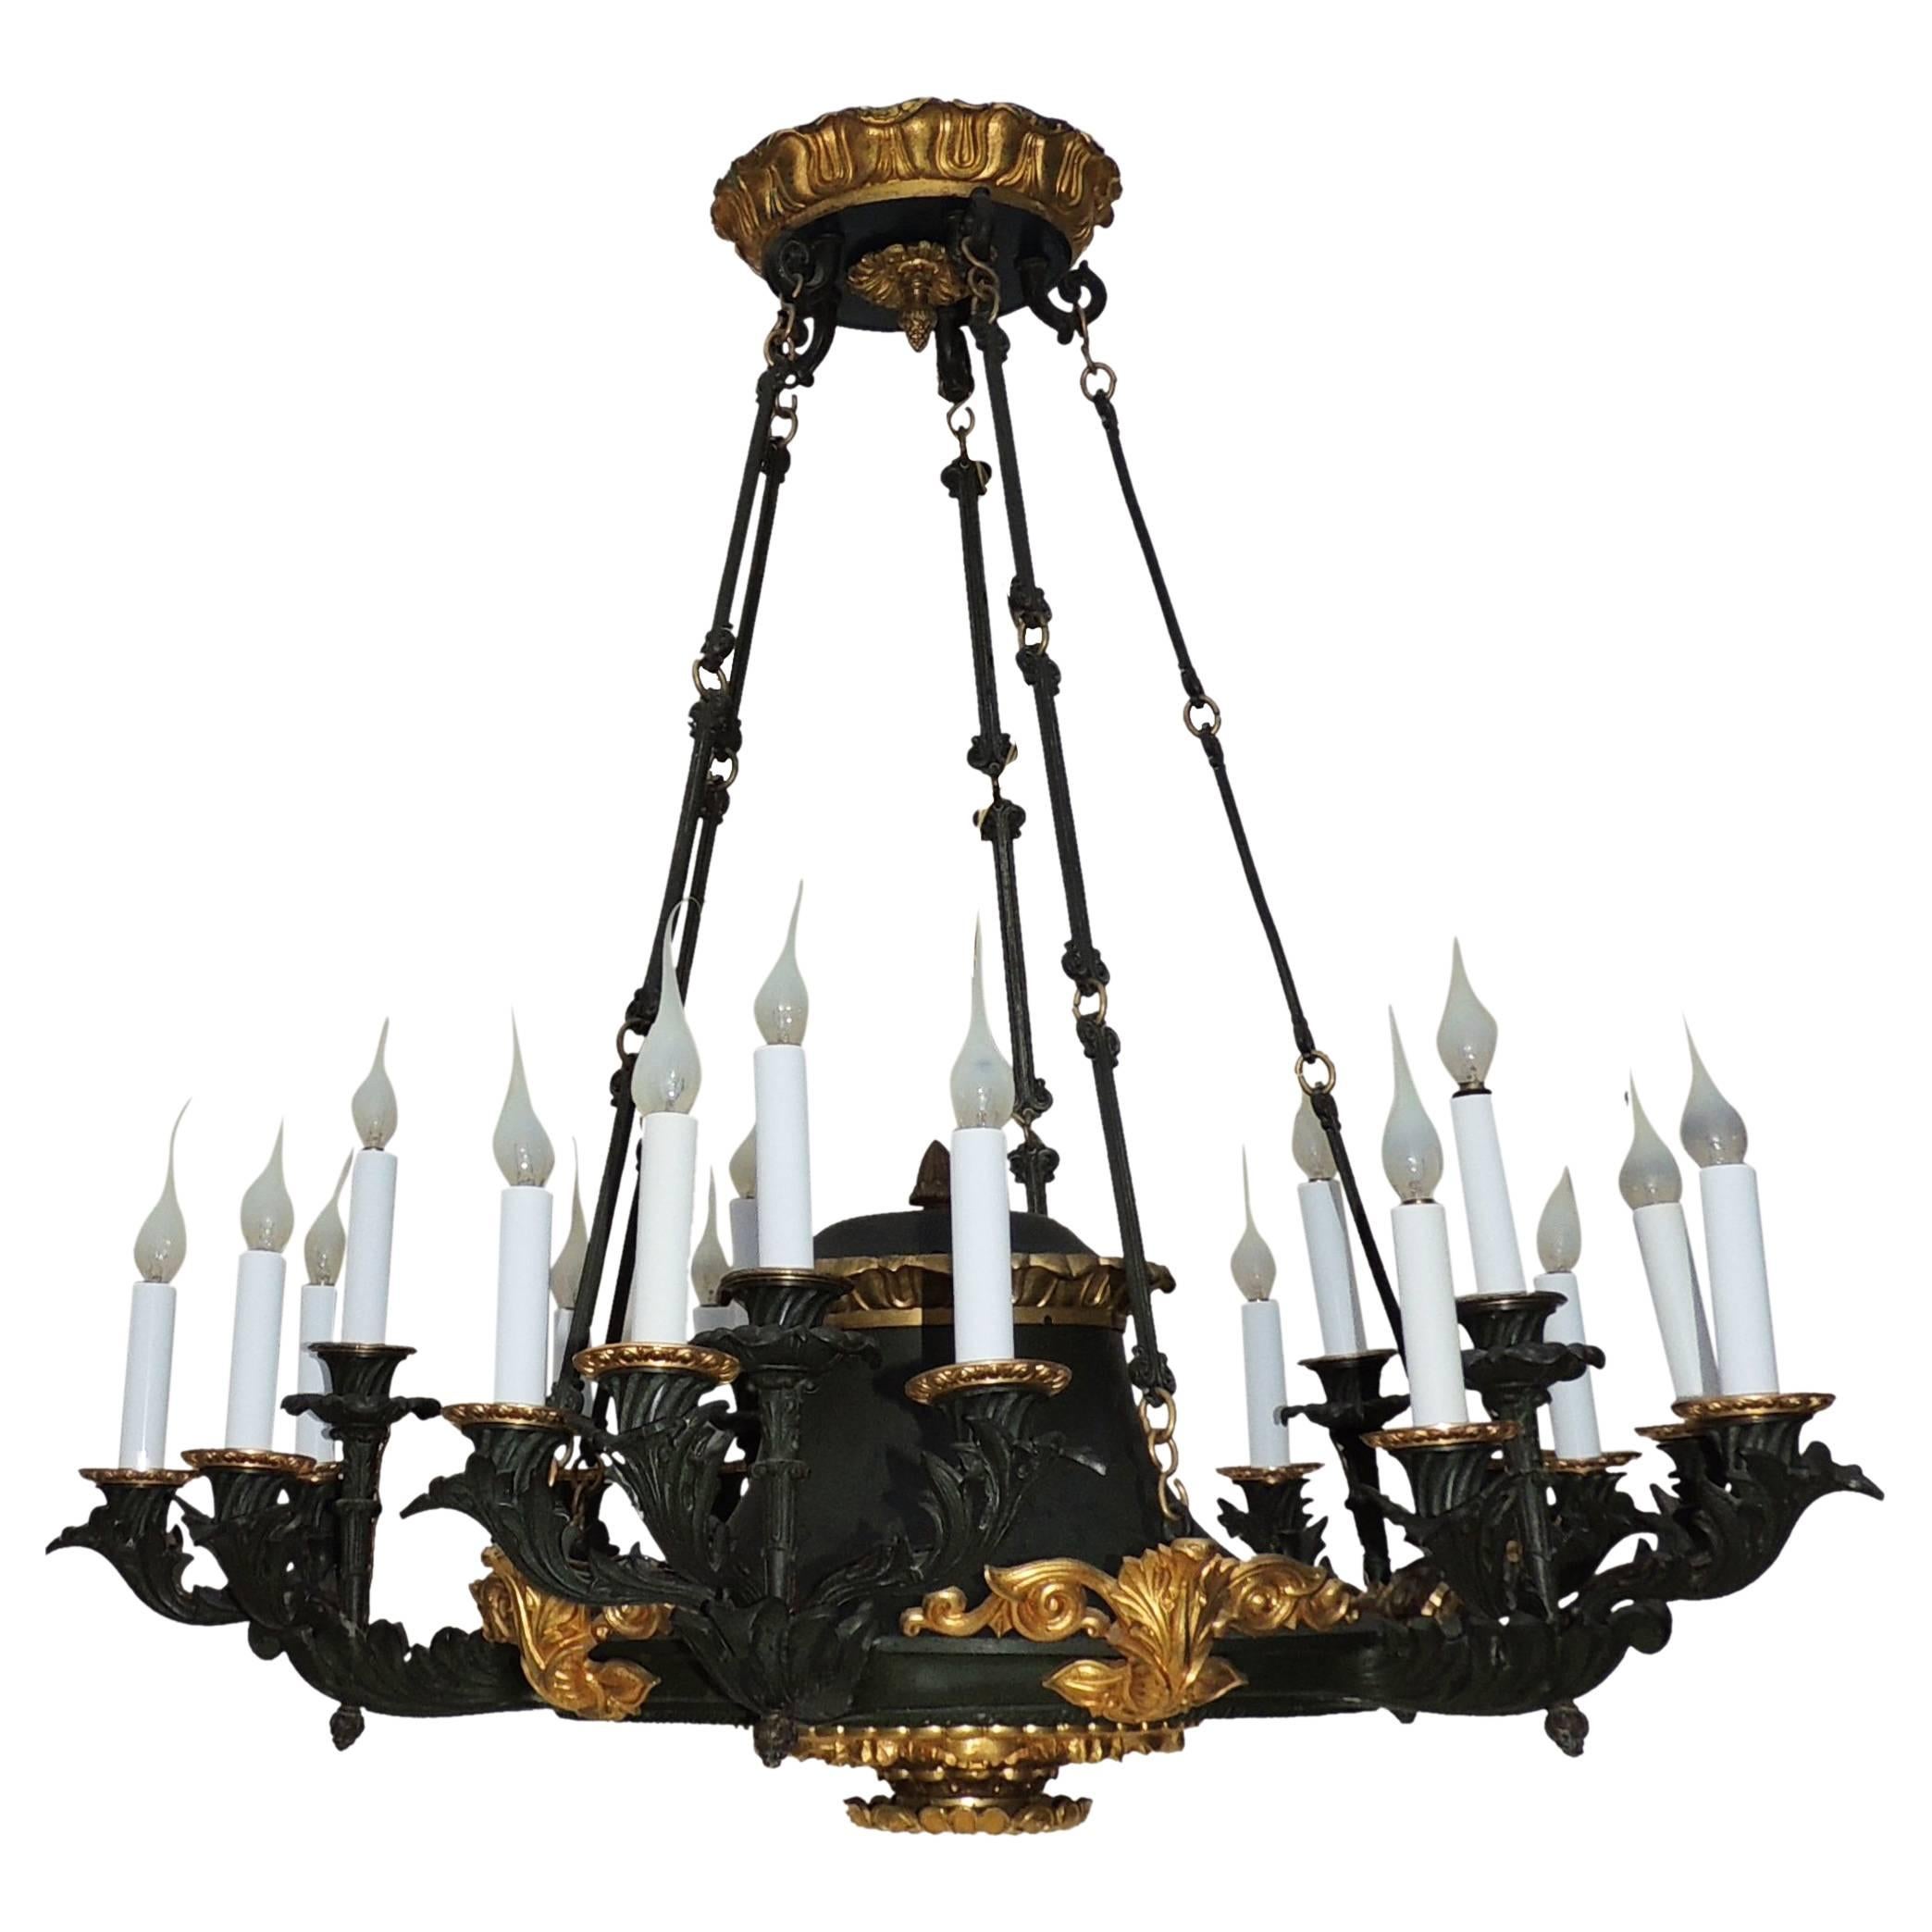 Palatial French Empire Doré Bronze and Patinated Neoclassical Chandelier Fixture For Sale